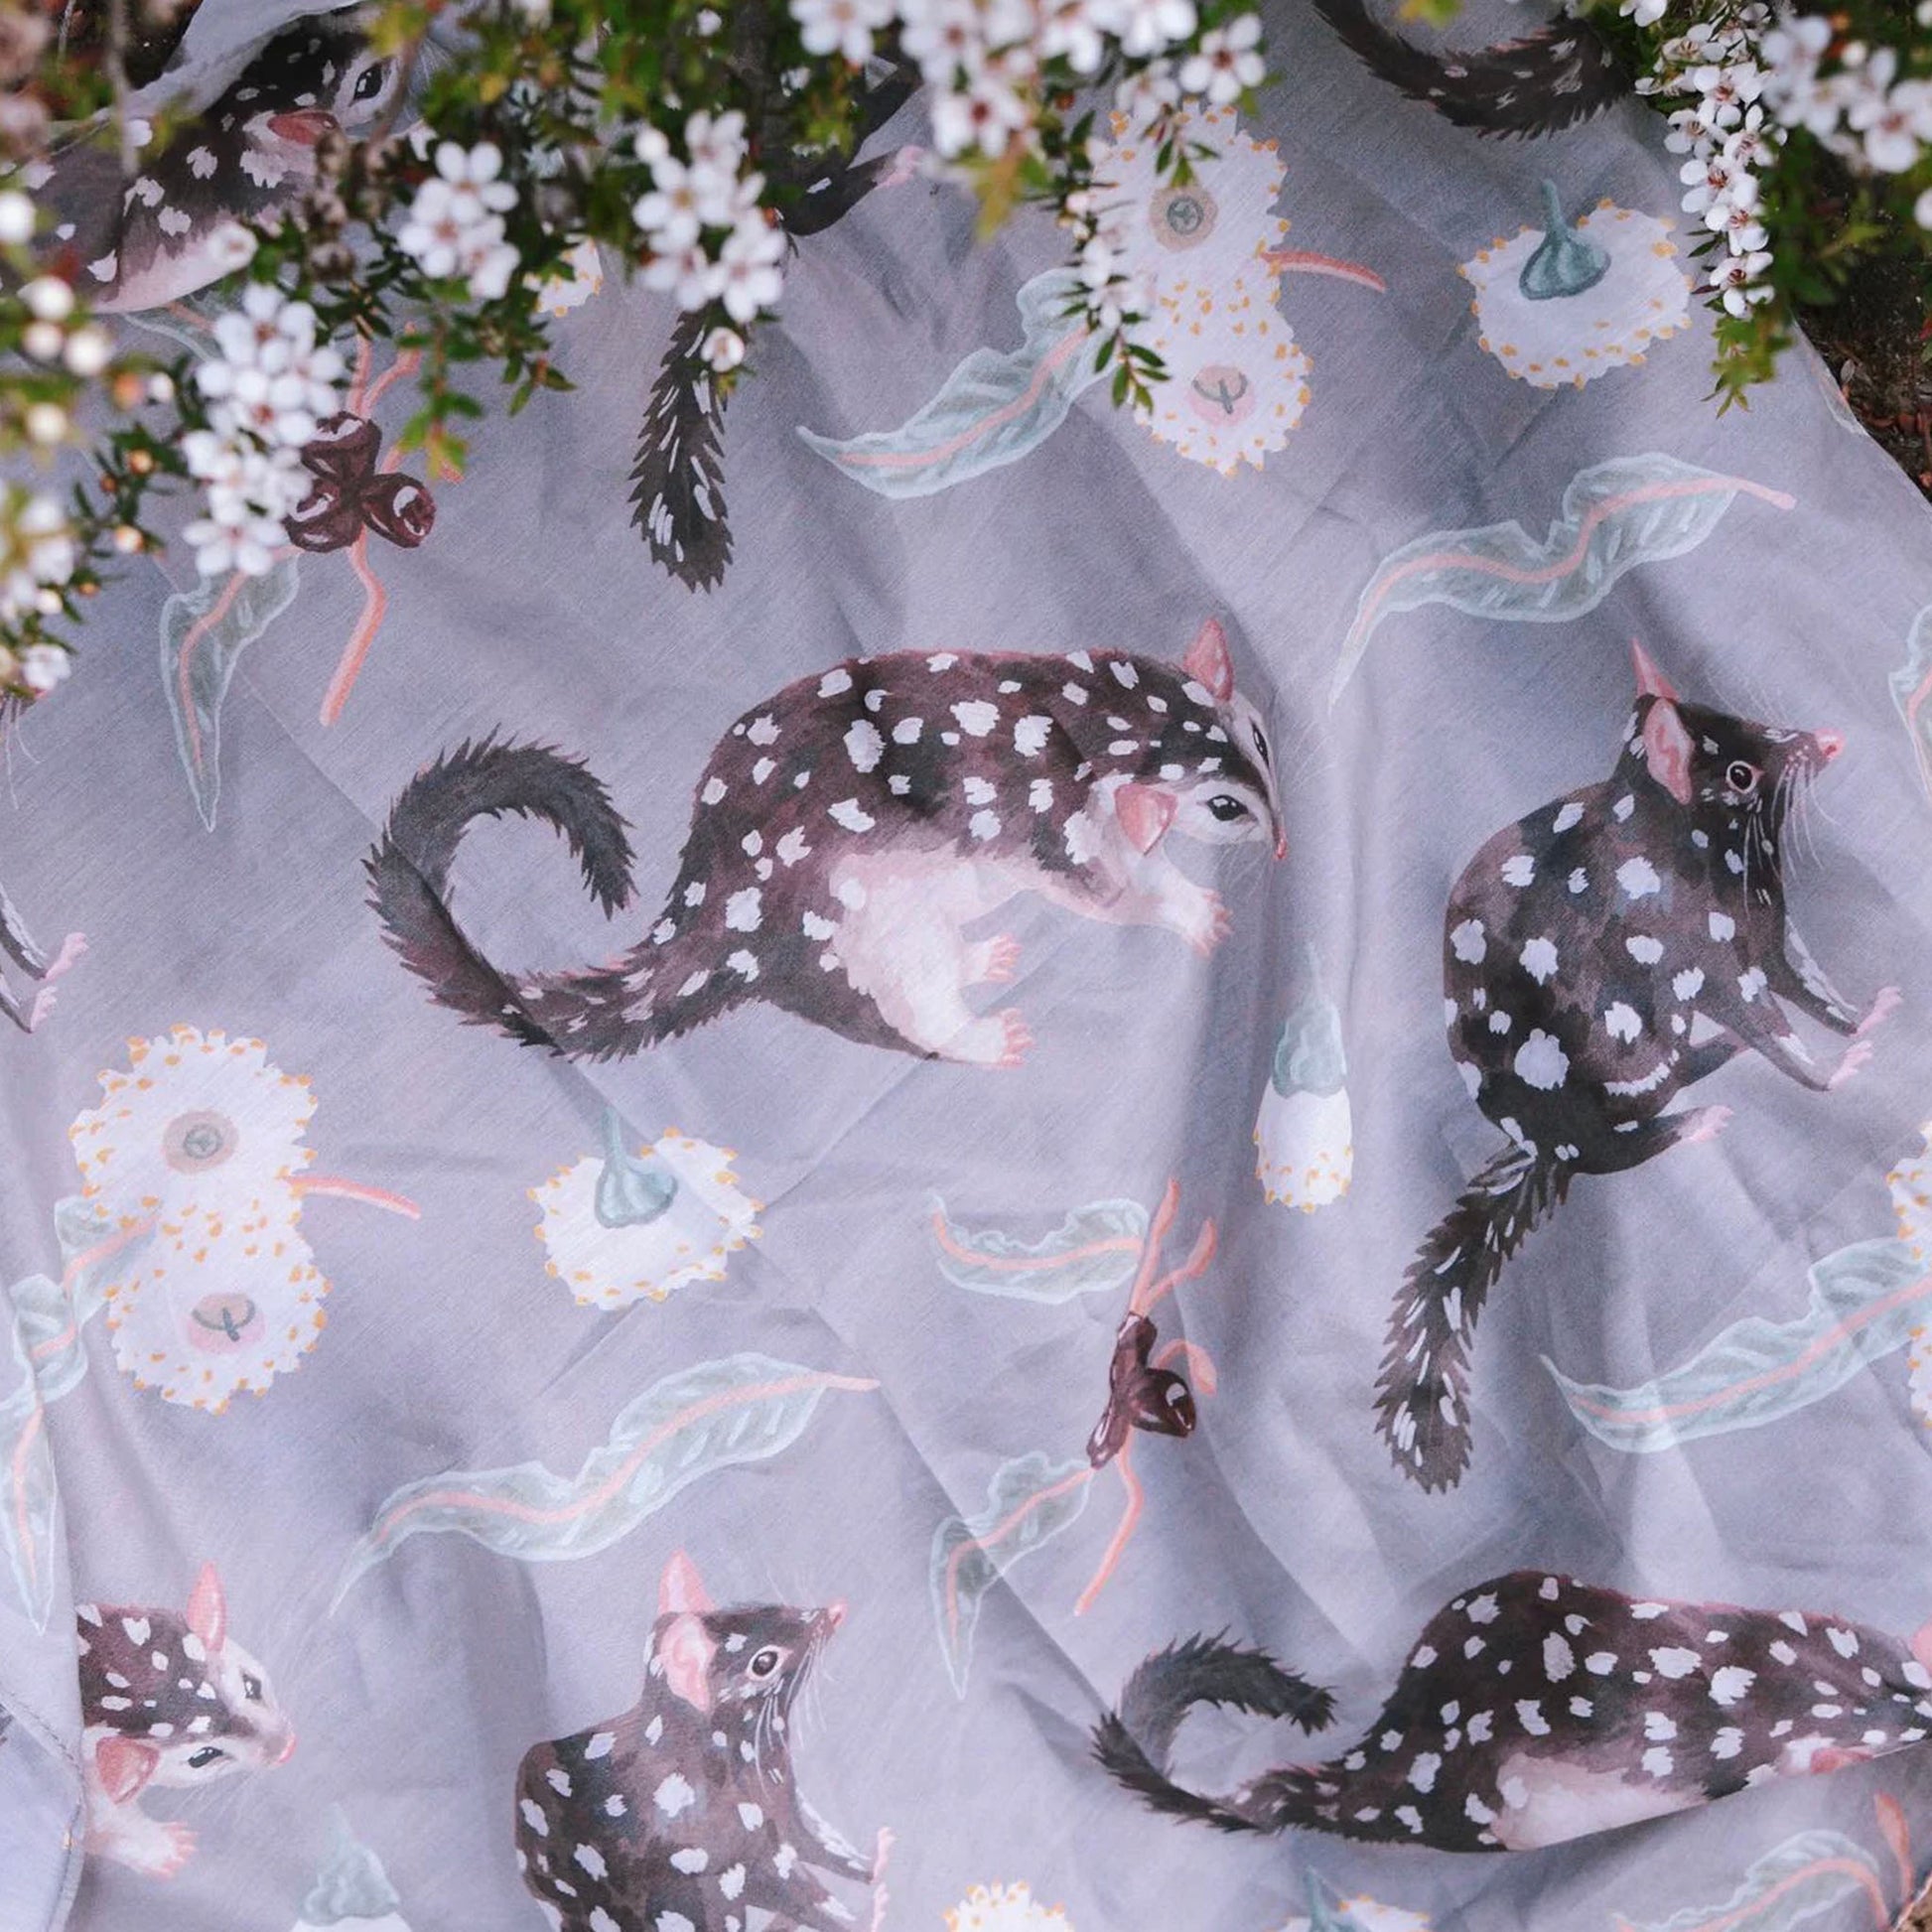 Australian native Eastern Quoll and wildflowers 180 x 65cm long silk cotton scarf.